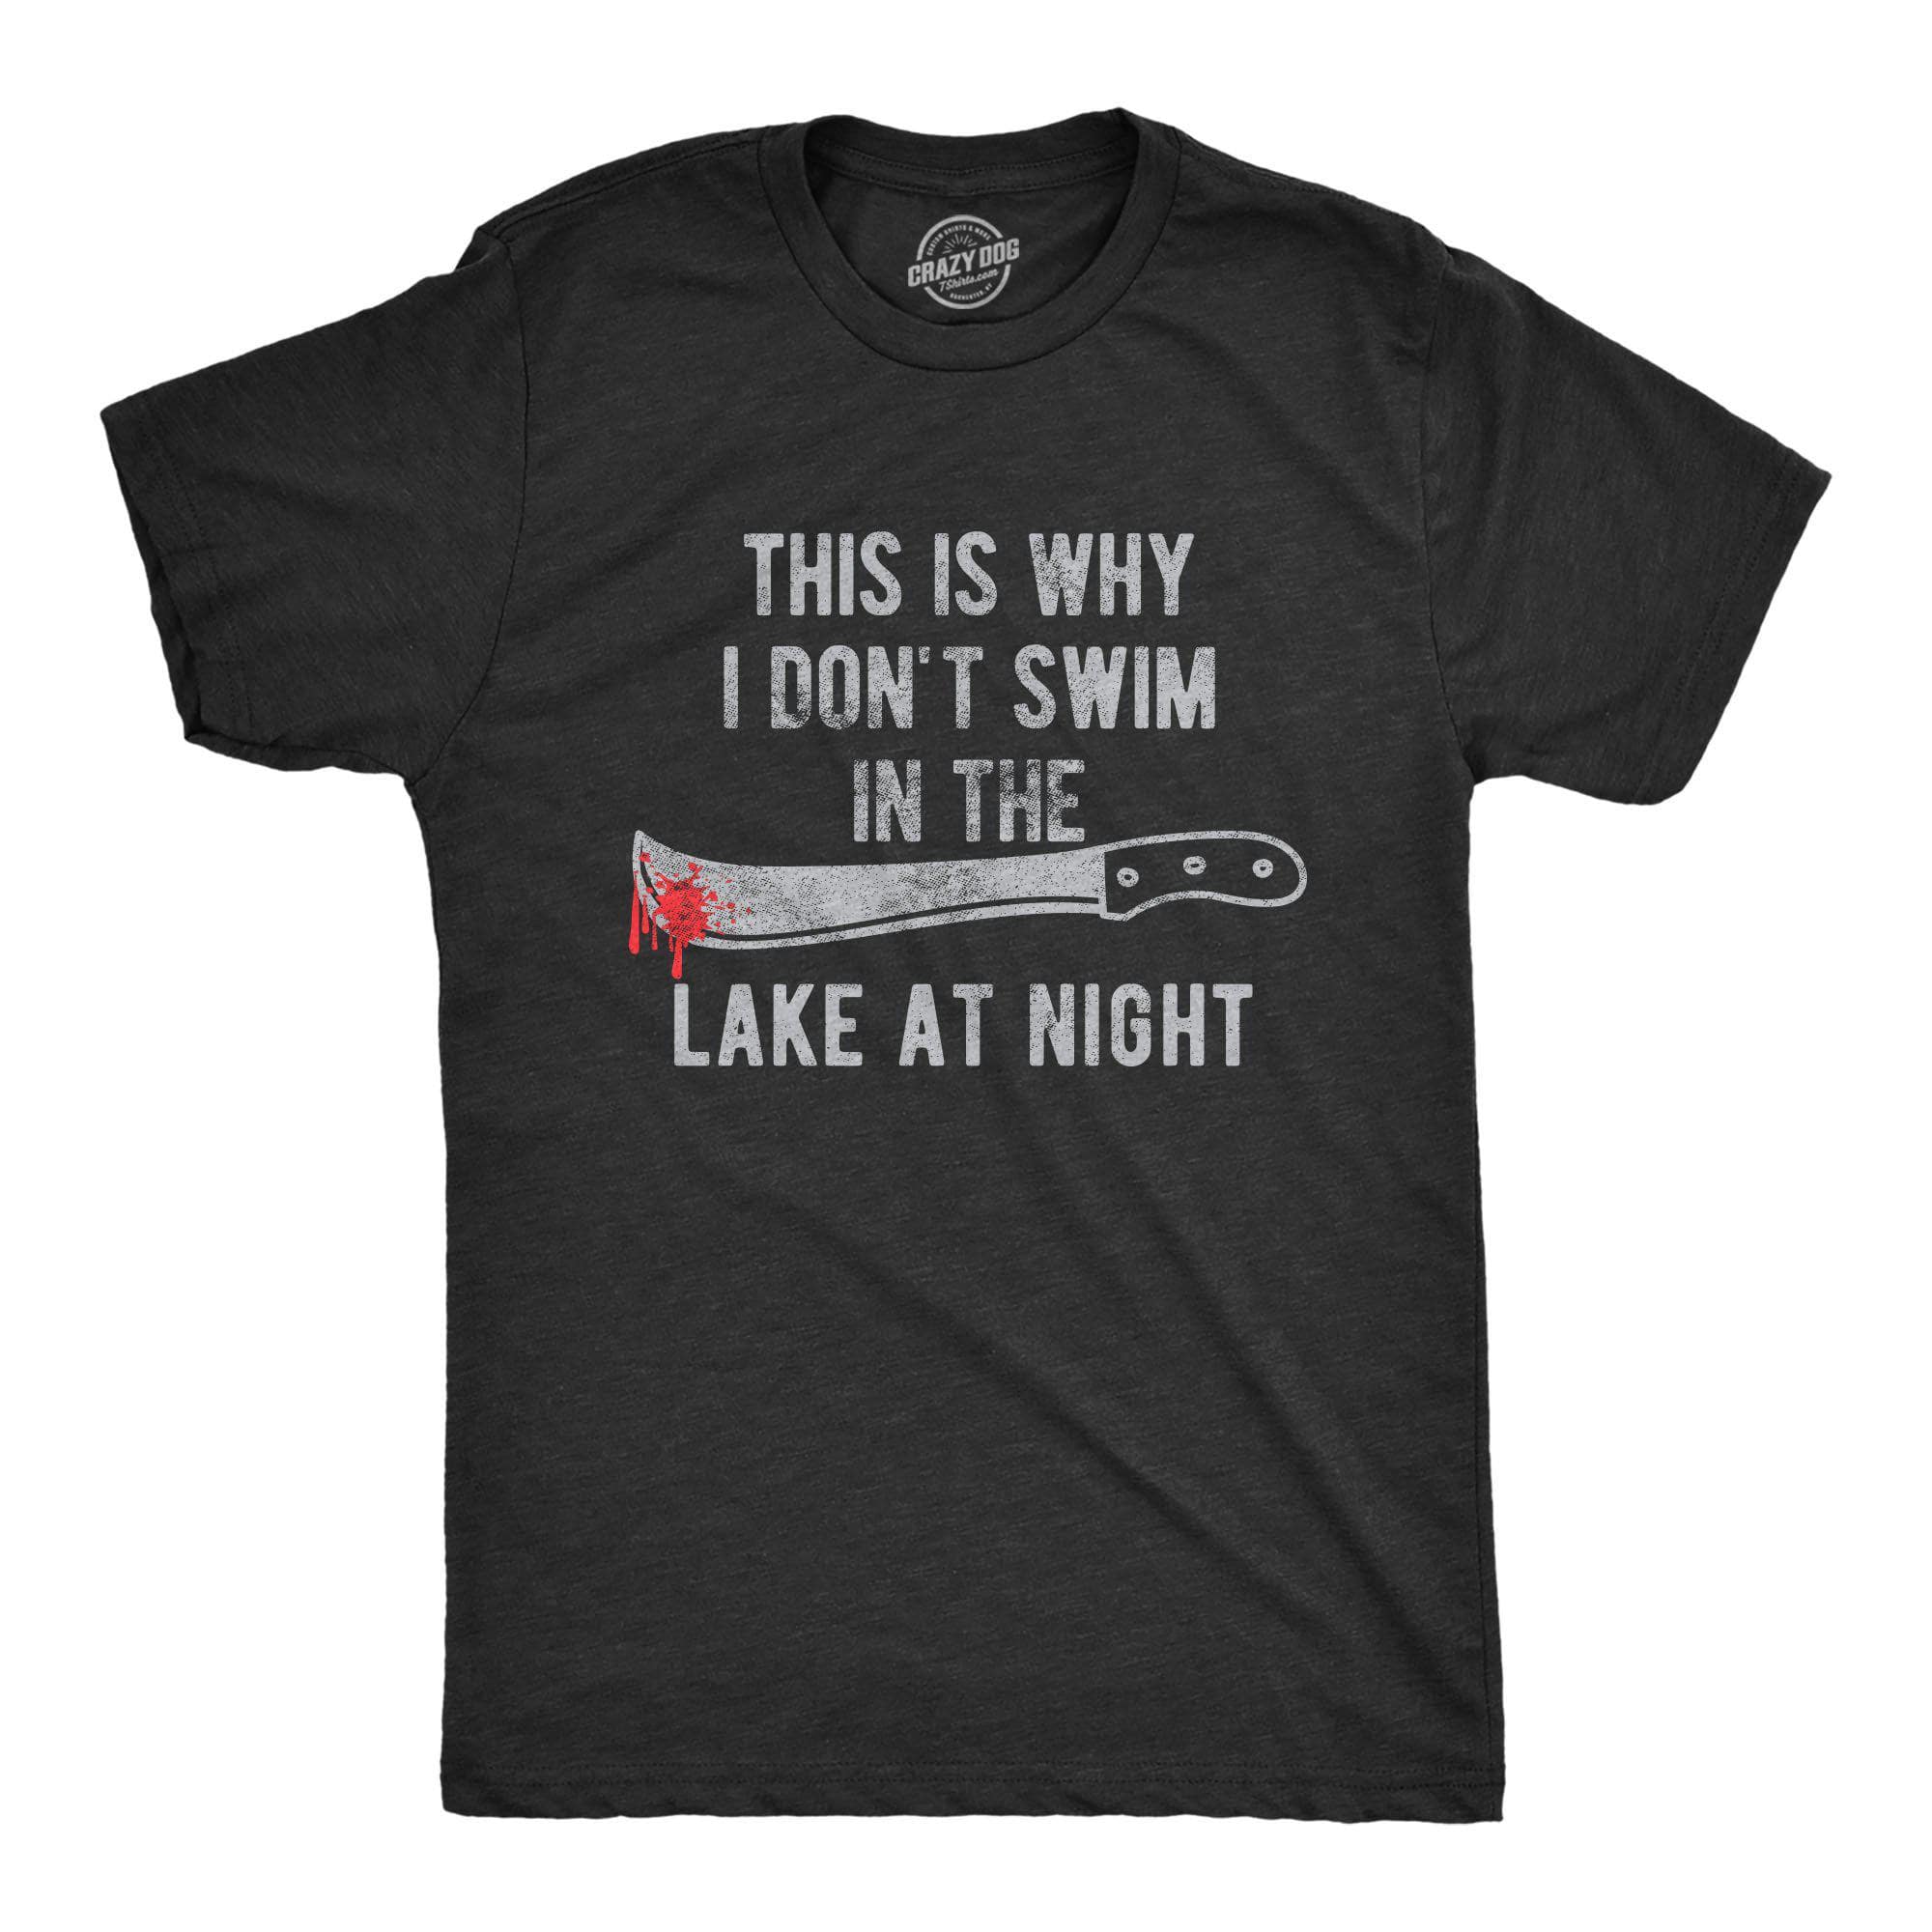 This Is Why I Don't Swim In The Lake At Night Men's Tshirt - Crazy Dog T-Shirts